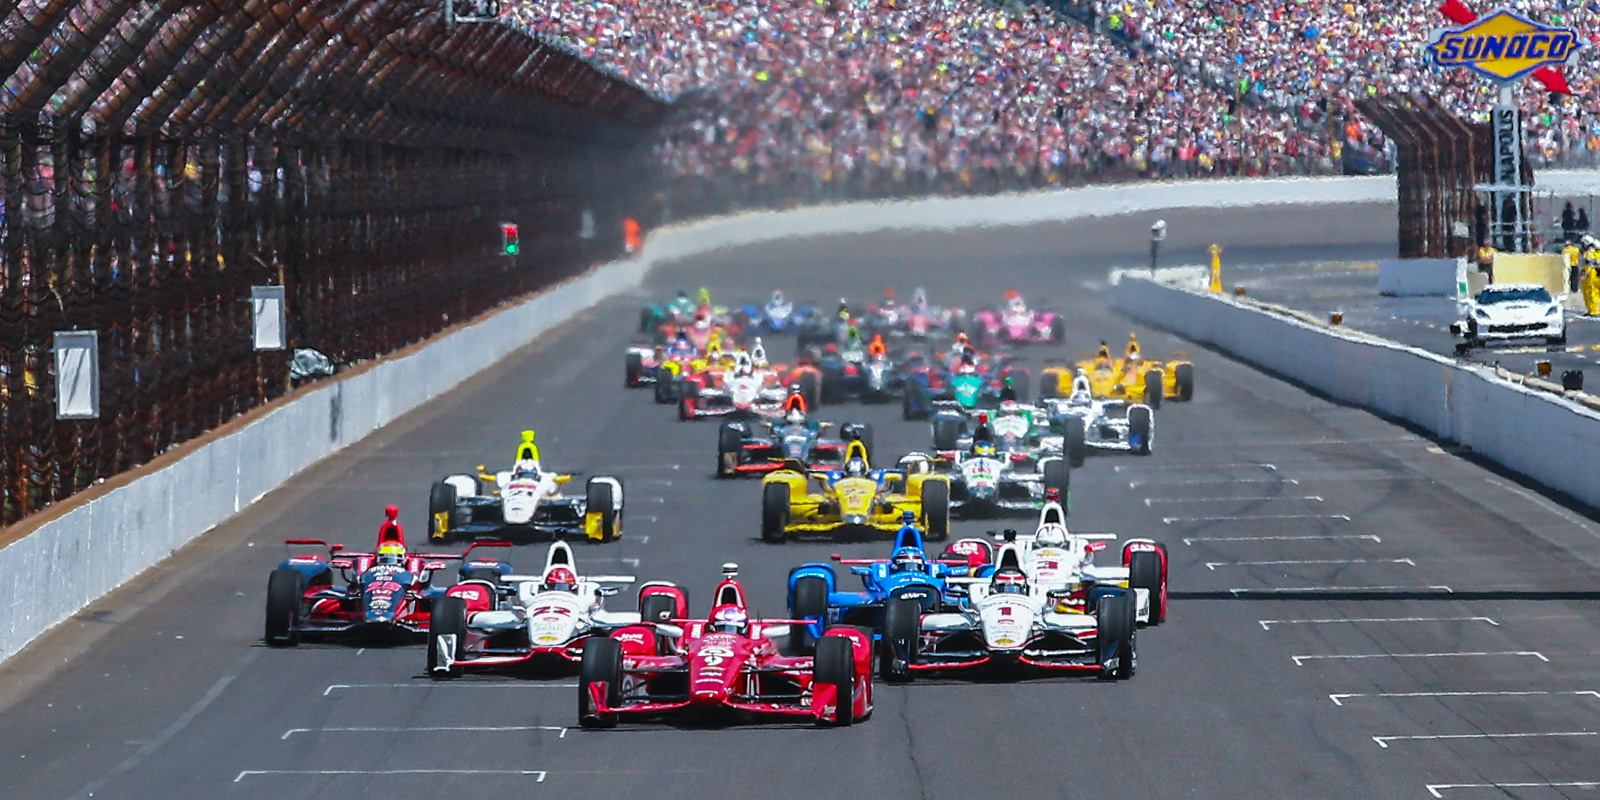 As the name implies, the Indianapolis 500 covers 500 miles in 200 laps on t...